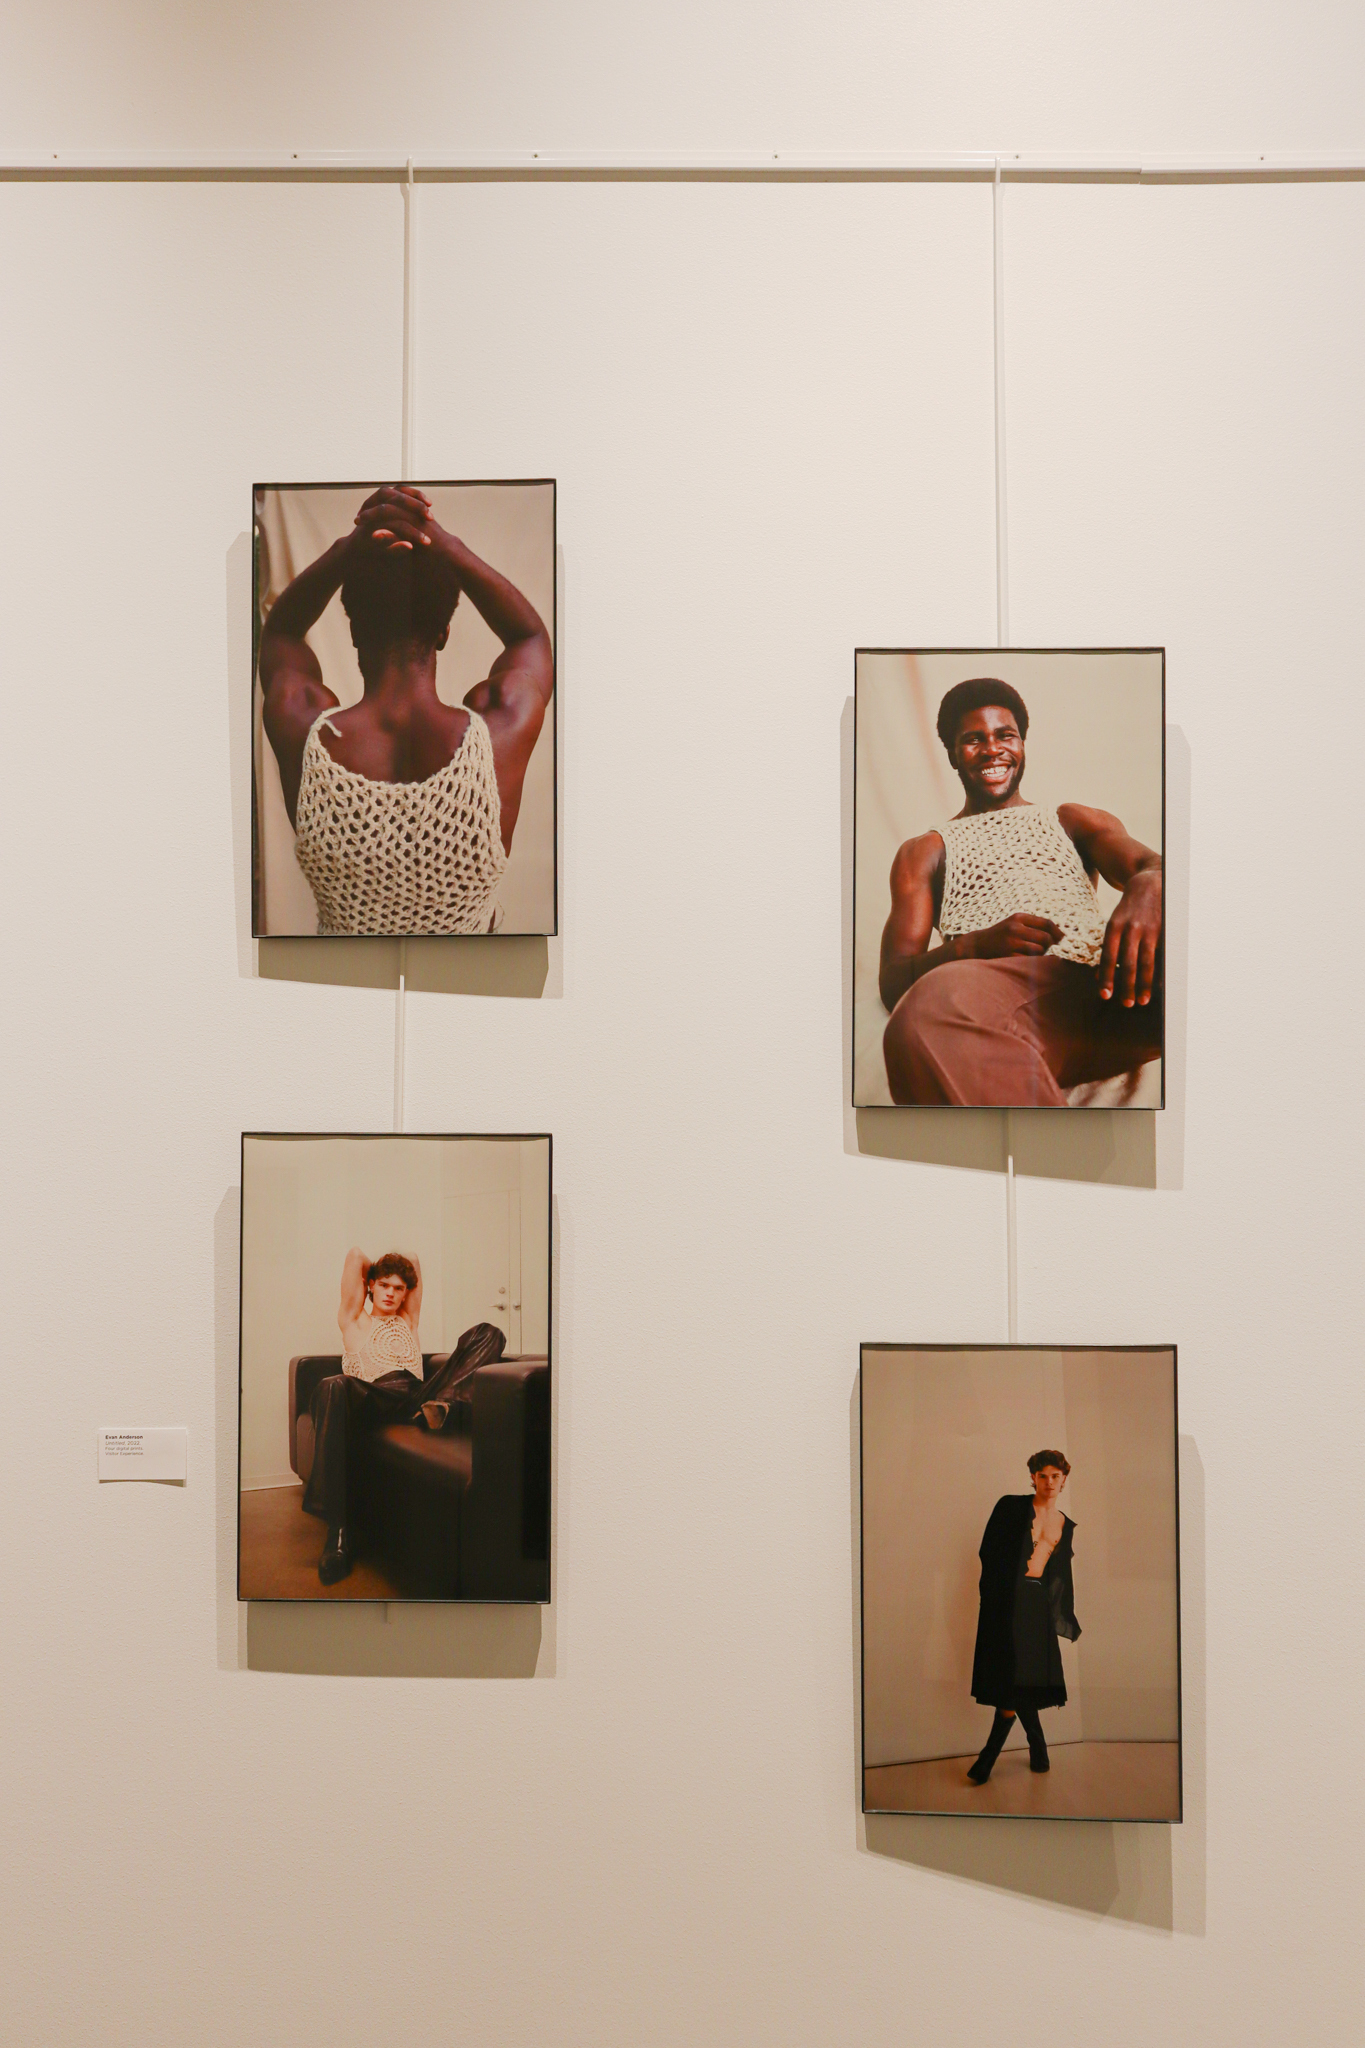 Four photographs are hung on a white wall, staggering in two rows stacked next to one another. In the top two images, a Black masculine-presenting individual is in a white crochet top. In the bottom two, a white masculine-presenting man is in a dark coat.